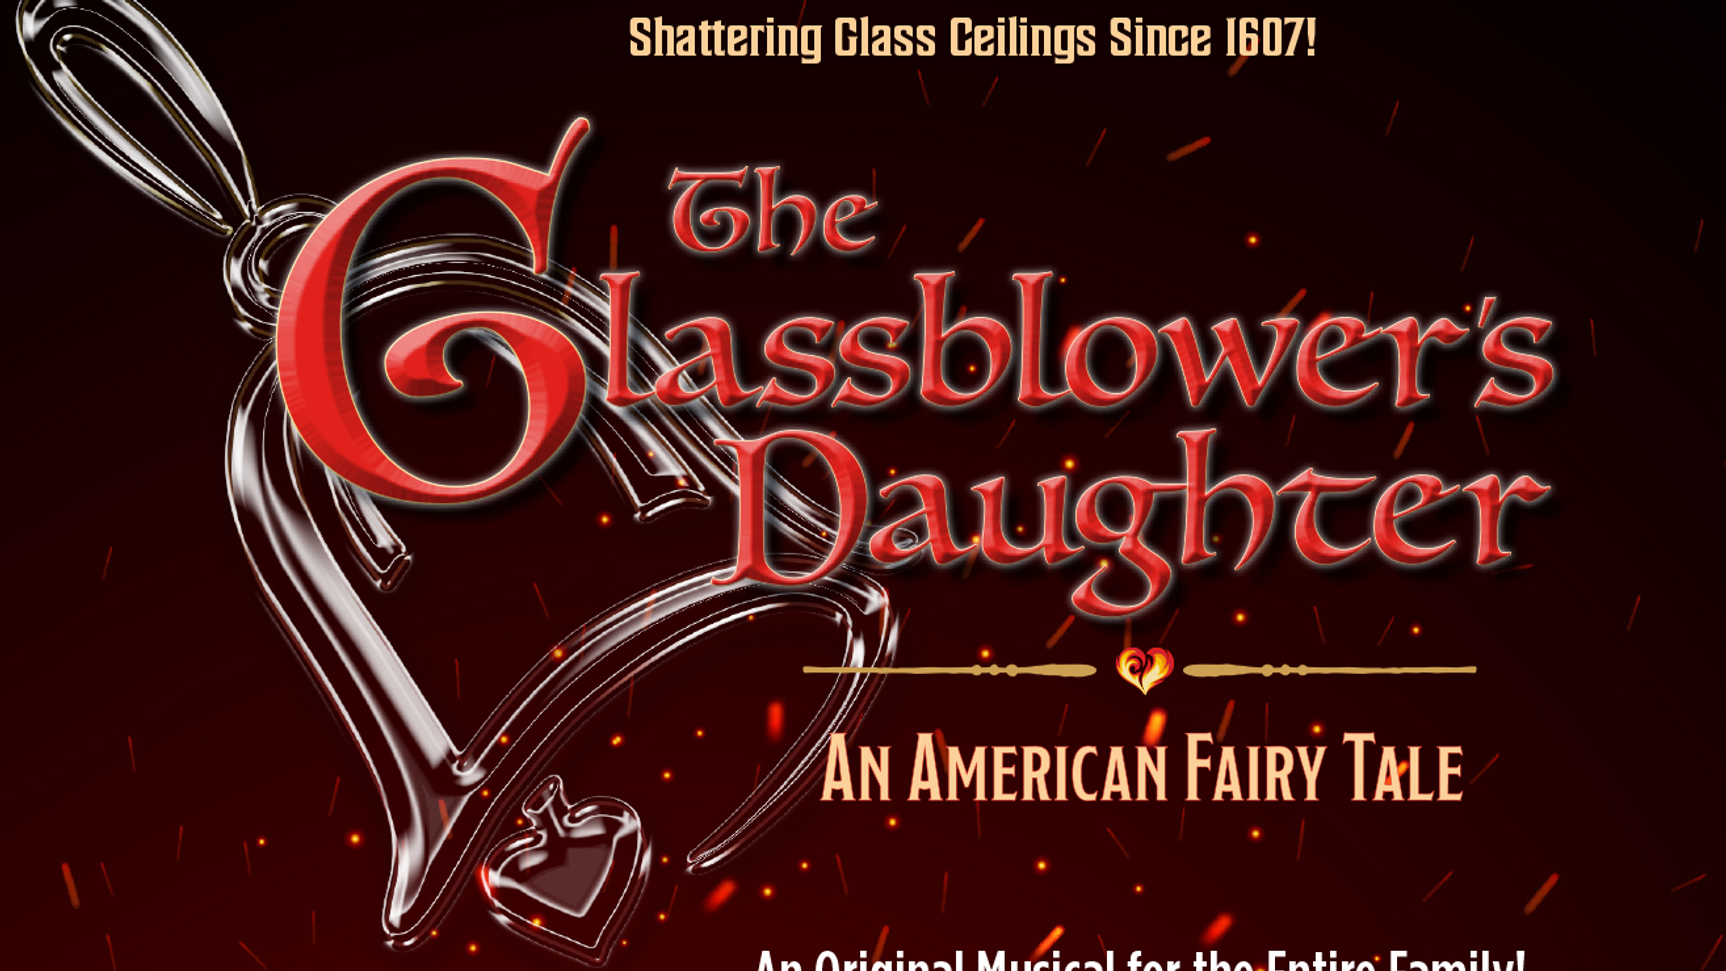 The Glassblower's Daughter